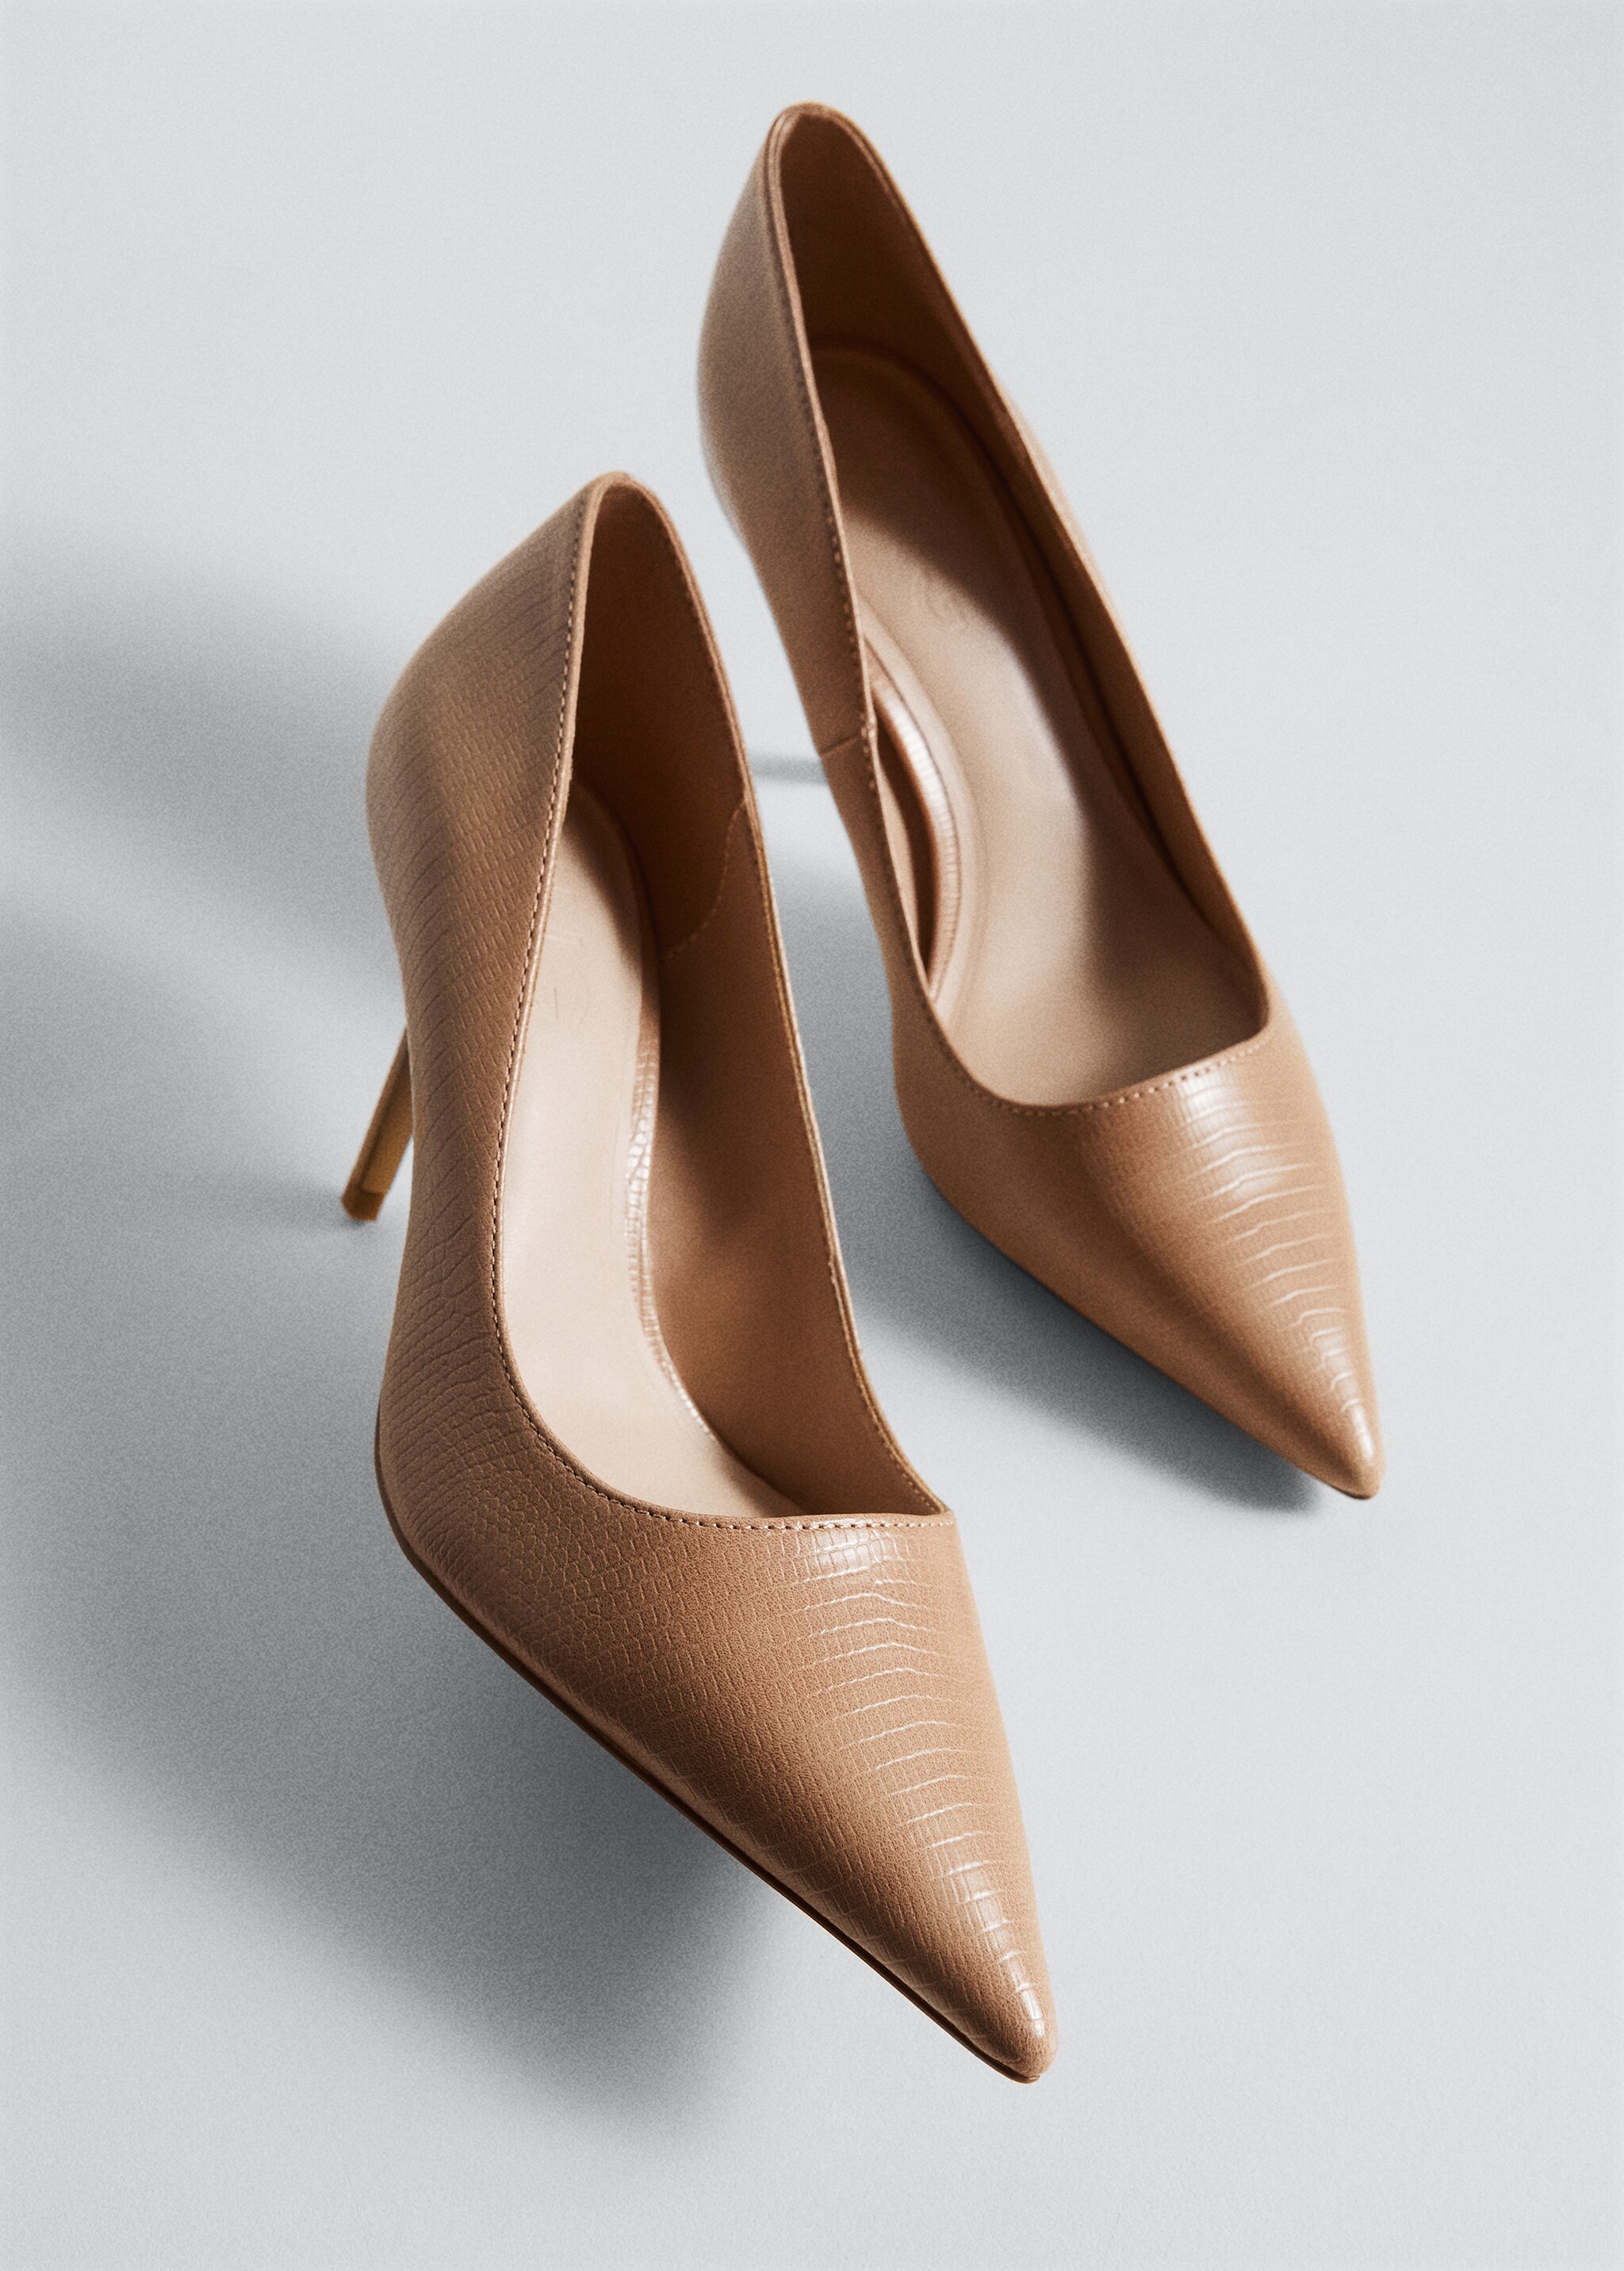 Pointed toe pumps - Details of the article 4